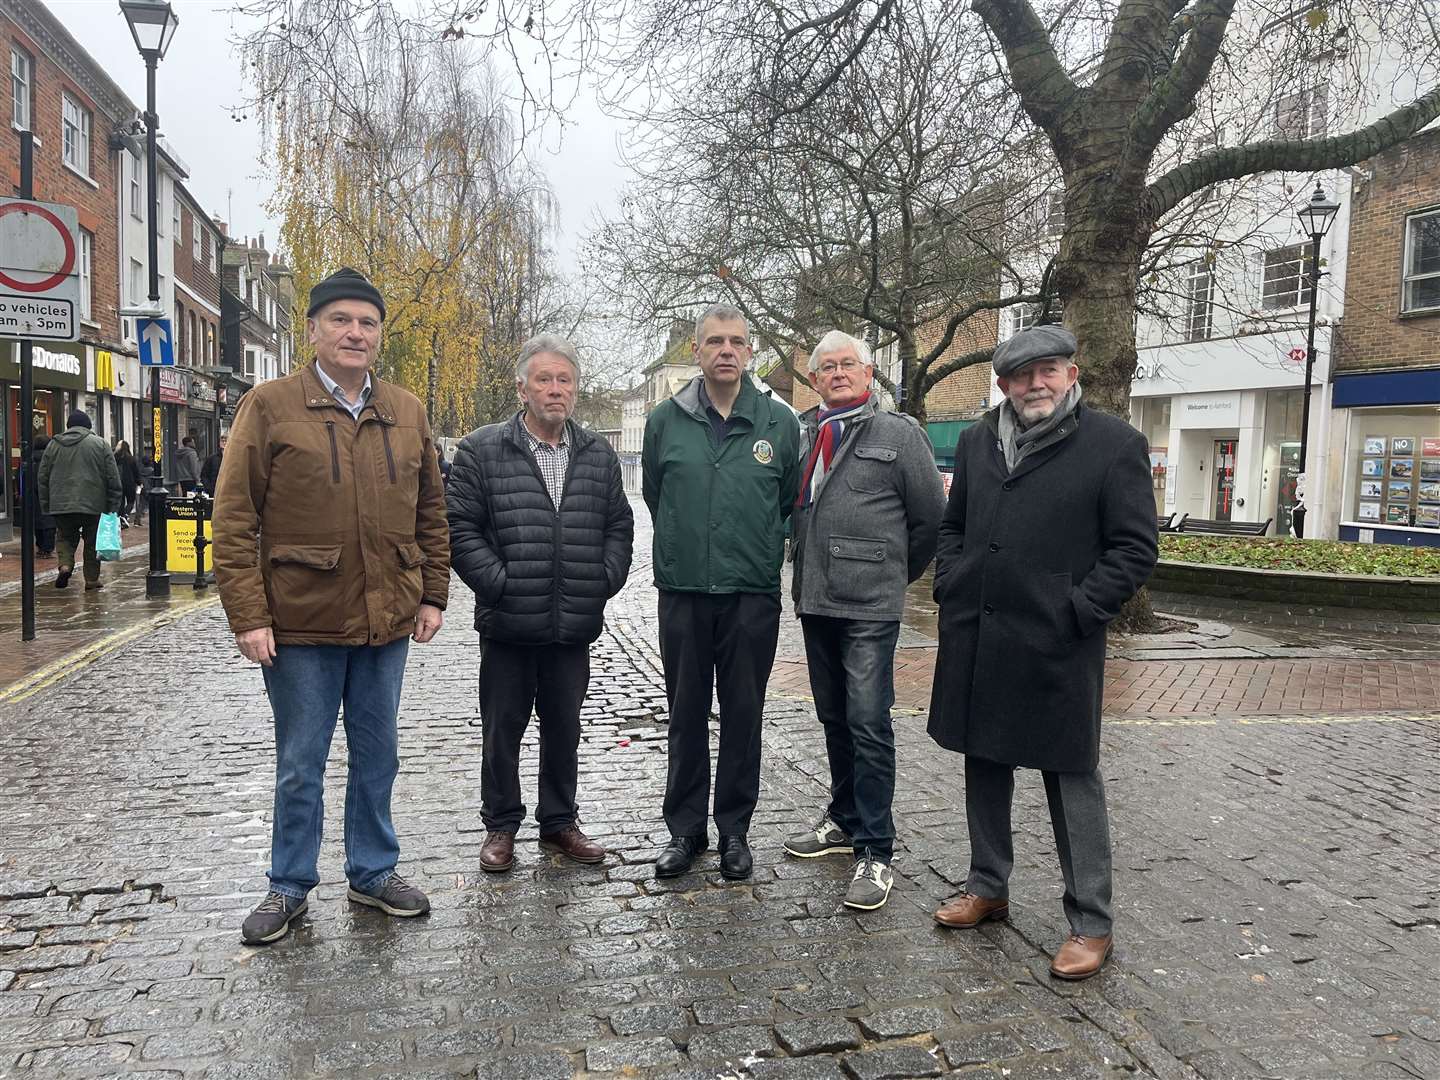 From left to right: Cllr Bernard Heyes (Con), Geoff Mathews of Soundcraft Hi-Fi, Cllr Paul Bartlett (Con), Vernon Seager of Central Ashford Community Forum and Cllr Charles Suddards (Lab) all say the cobbles should stay.